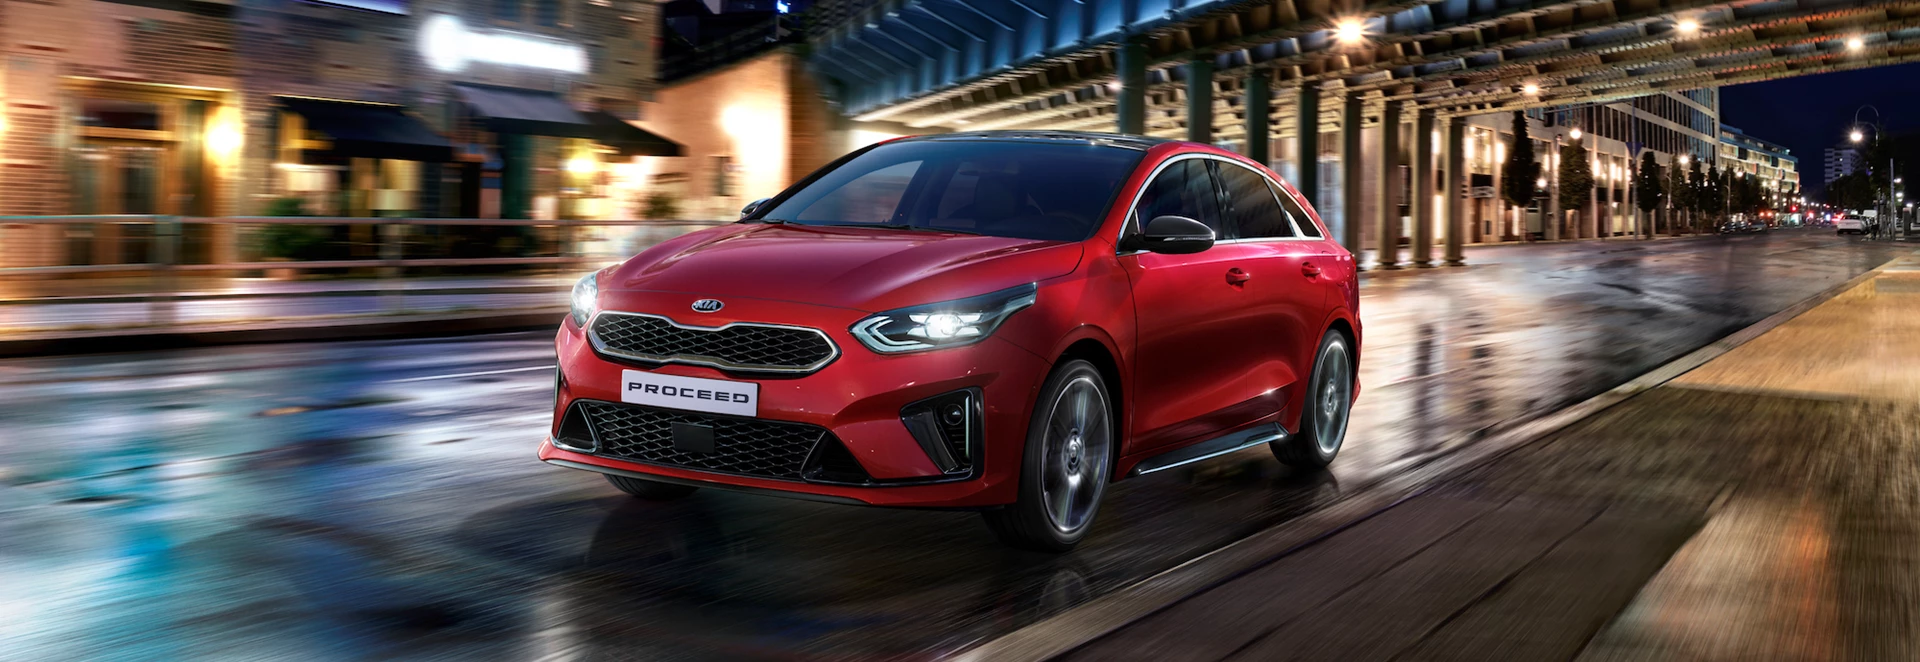 Kia Proceed prices and specifications revealed